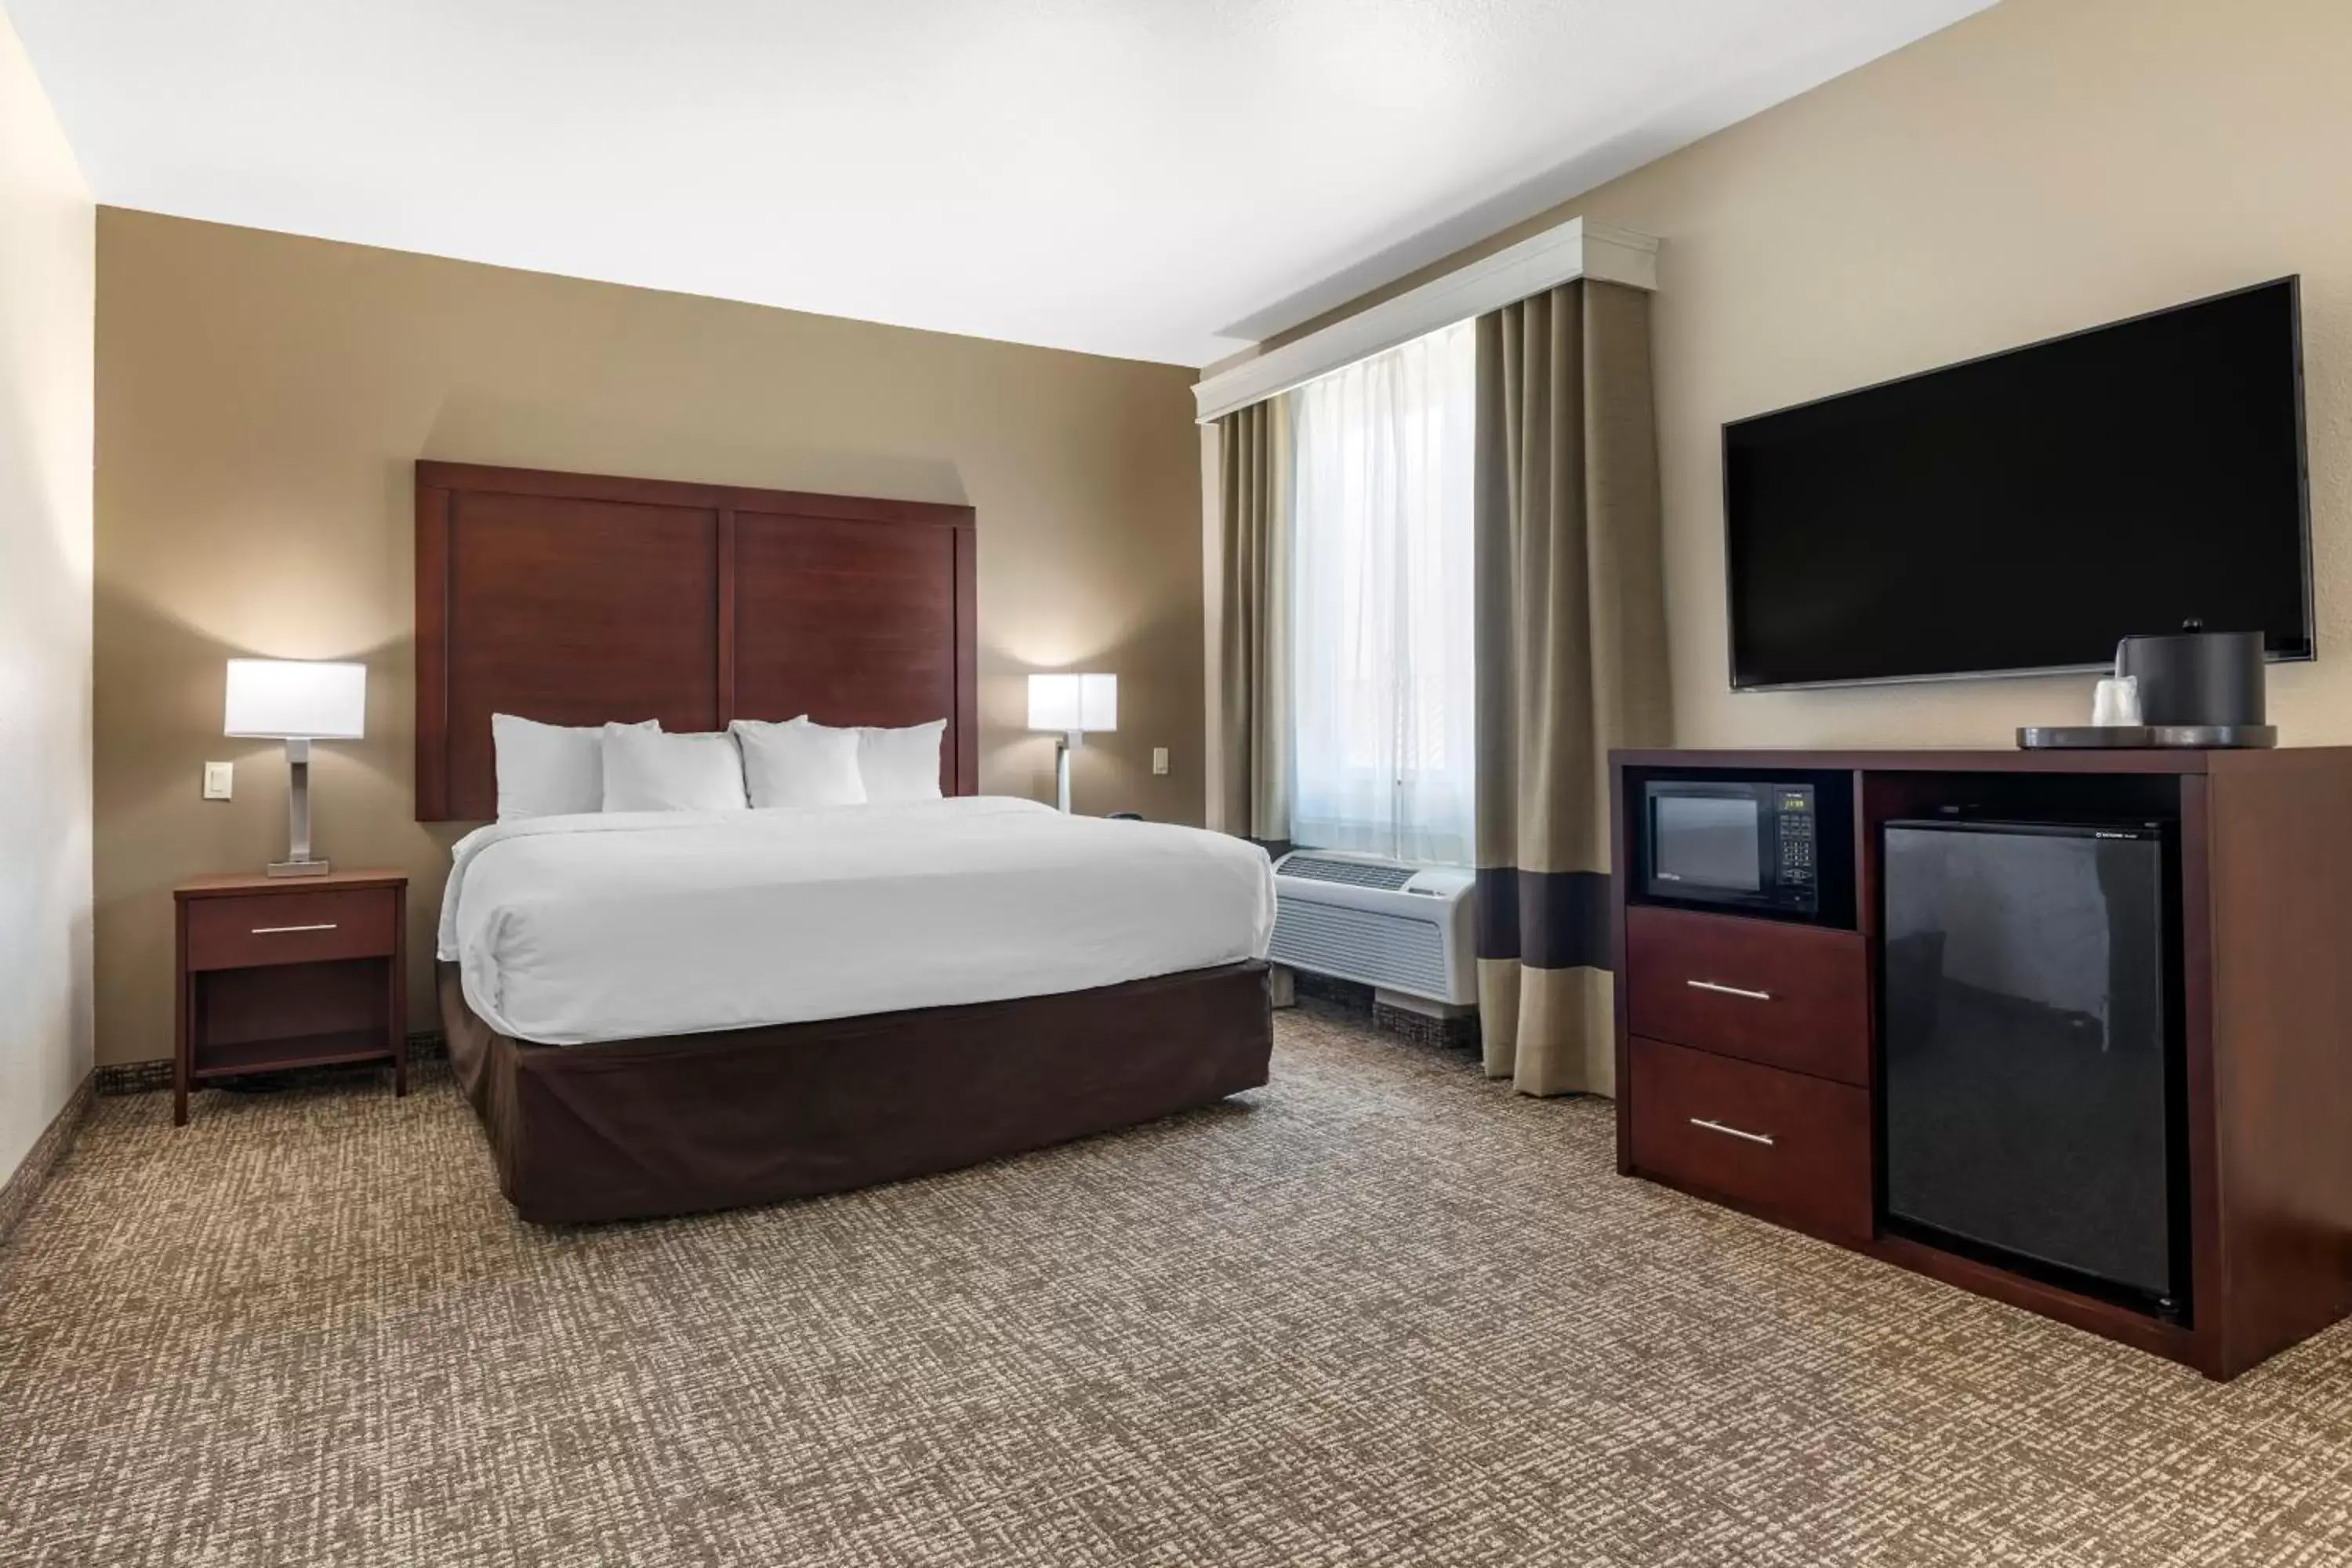 King Room - Accessible/Non-Smoking in Comfort Inn & Suites Near Lake Lewisville